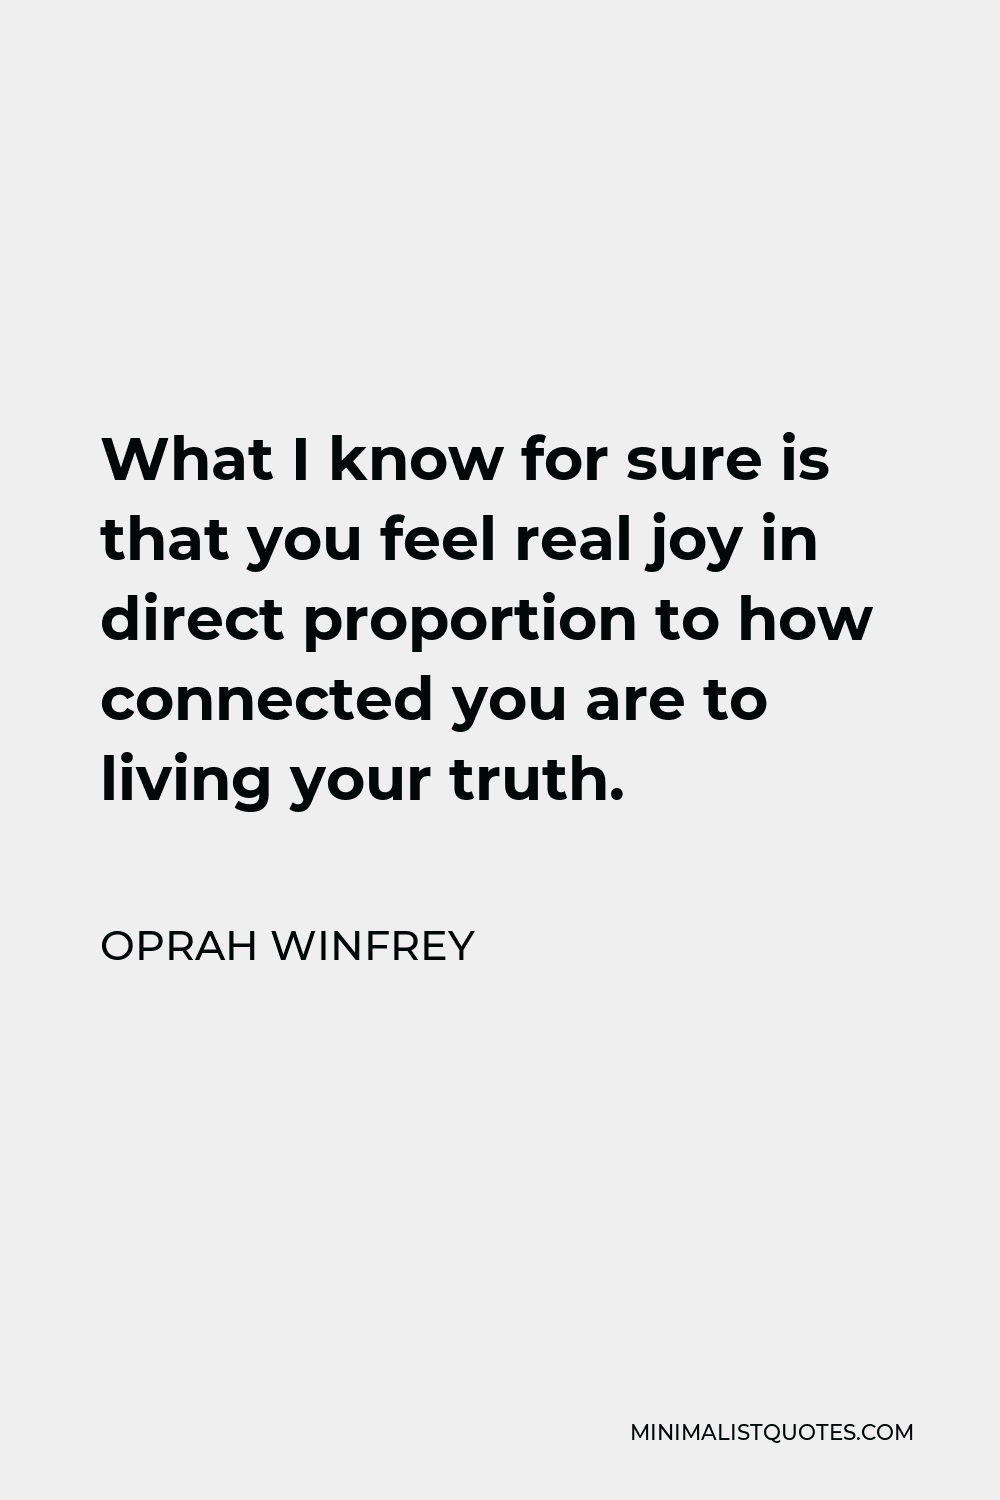 Oprah Winfrey Quote - What I know for sure is that you feel real joy in direct proportion to how connected you are to living your truth.